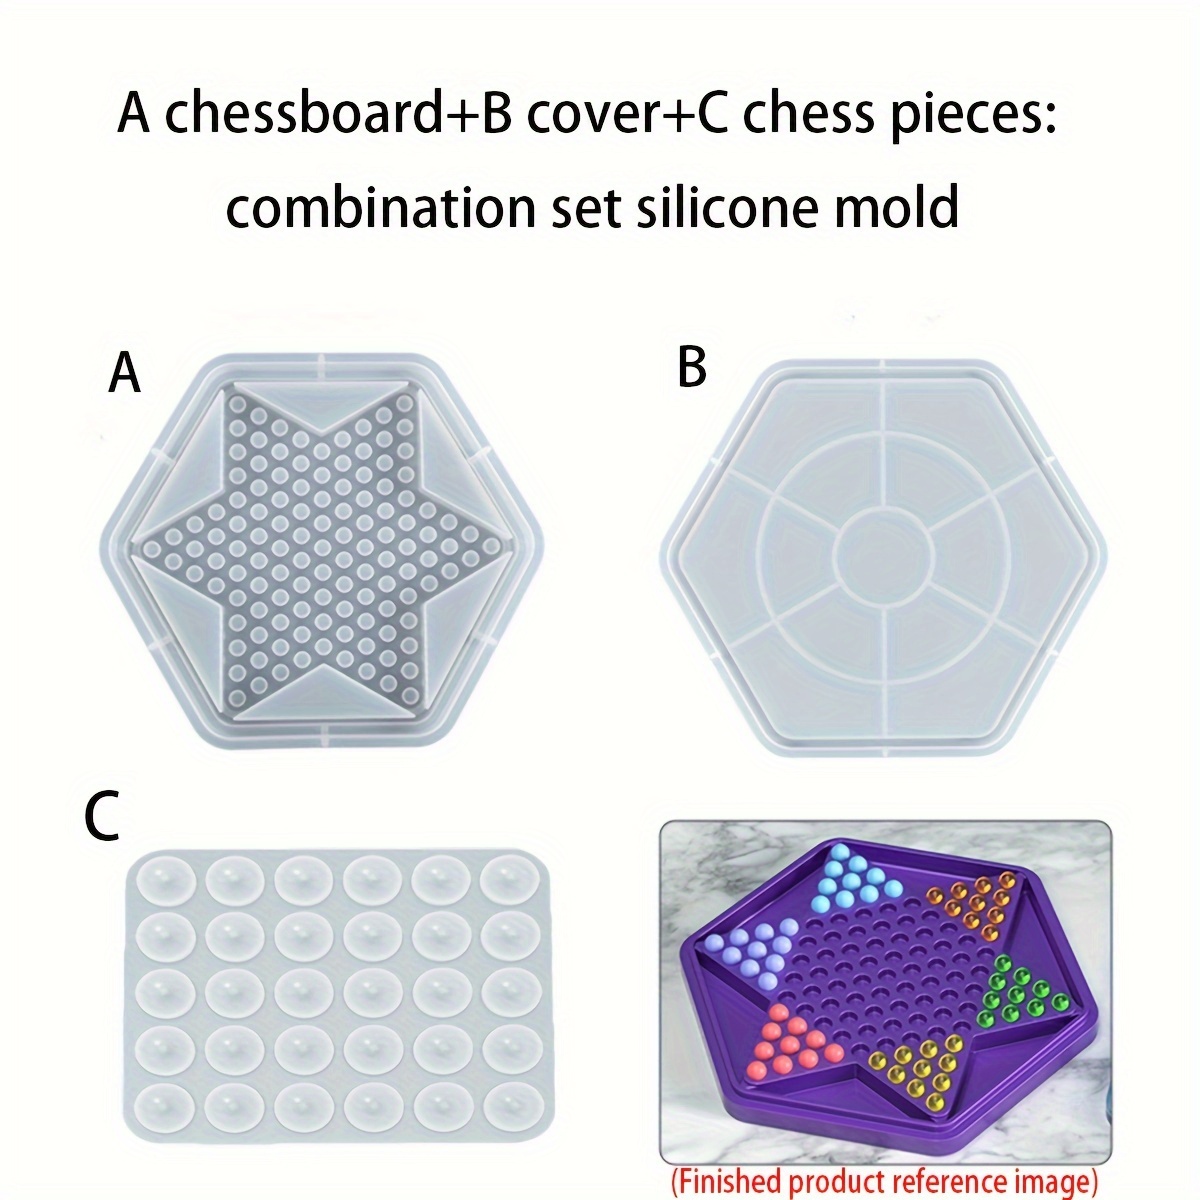 

Diy Chess Set Silicone Mold Kit - Crystal Resin & Gypsum Casting For Creative Checkerboard, Box & Pieces